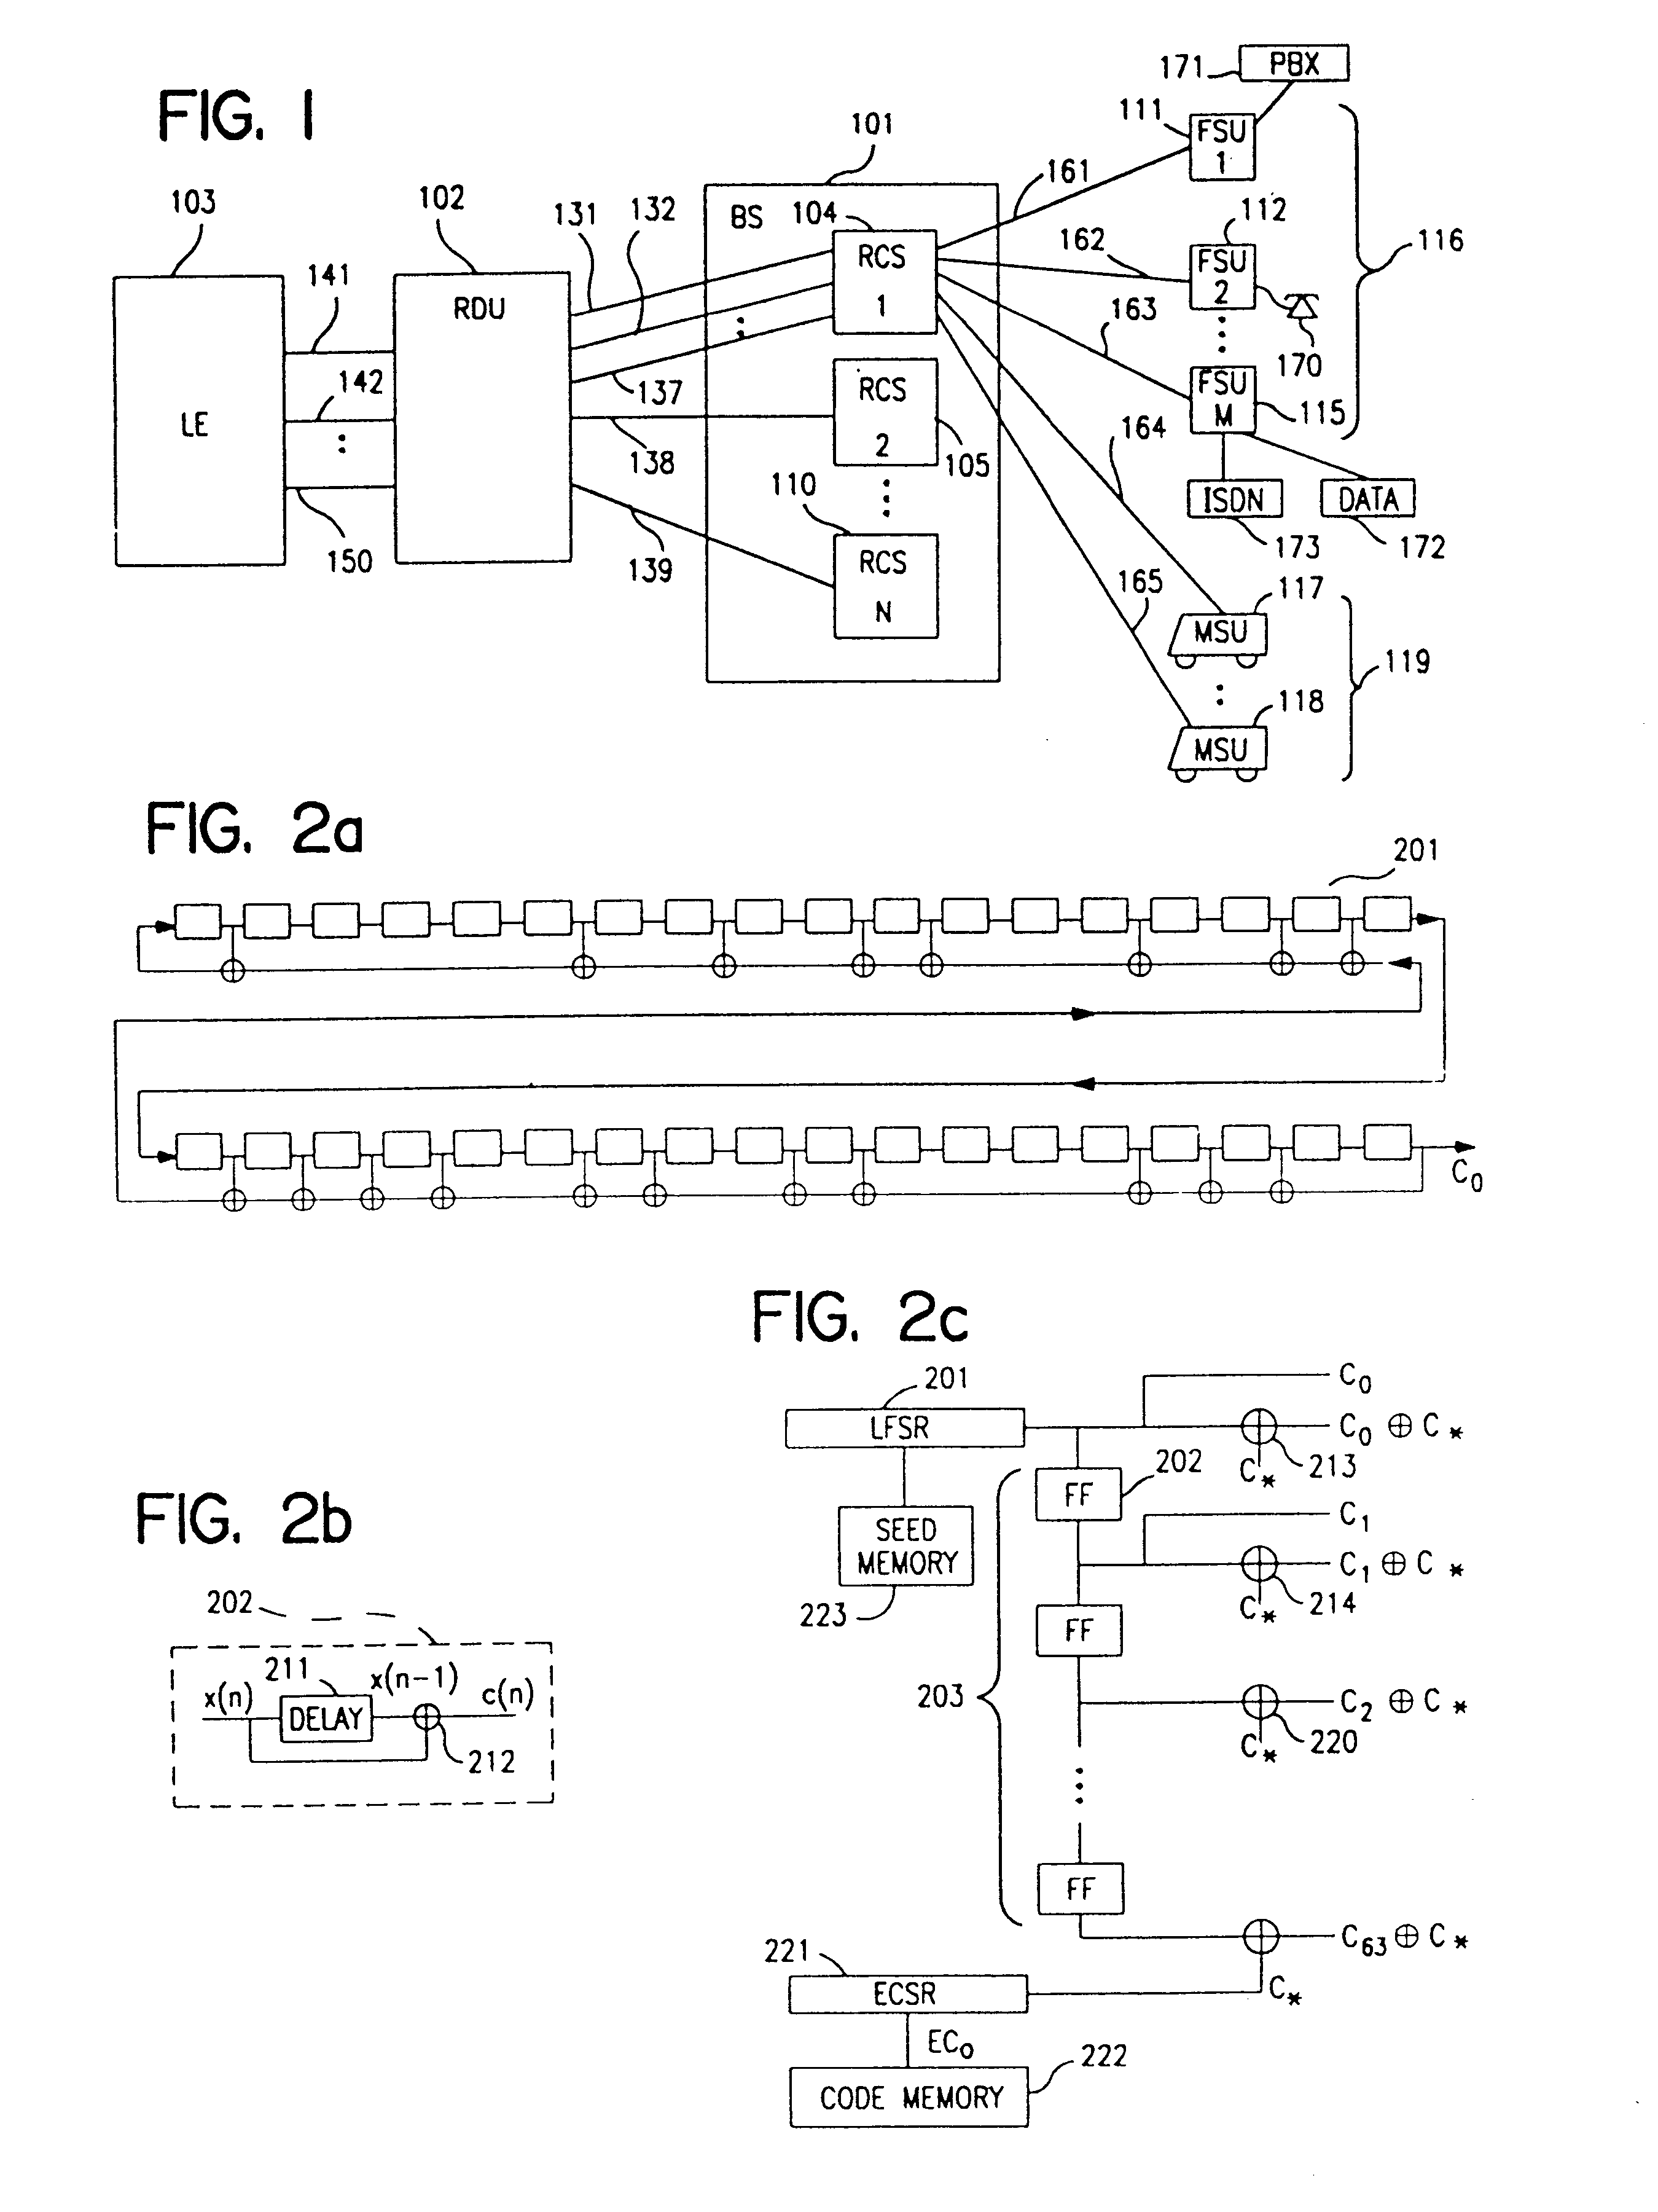 Apparatus for adaptive reverse power control for spread-spectrum communications